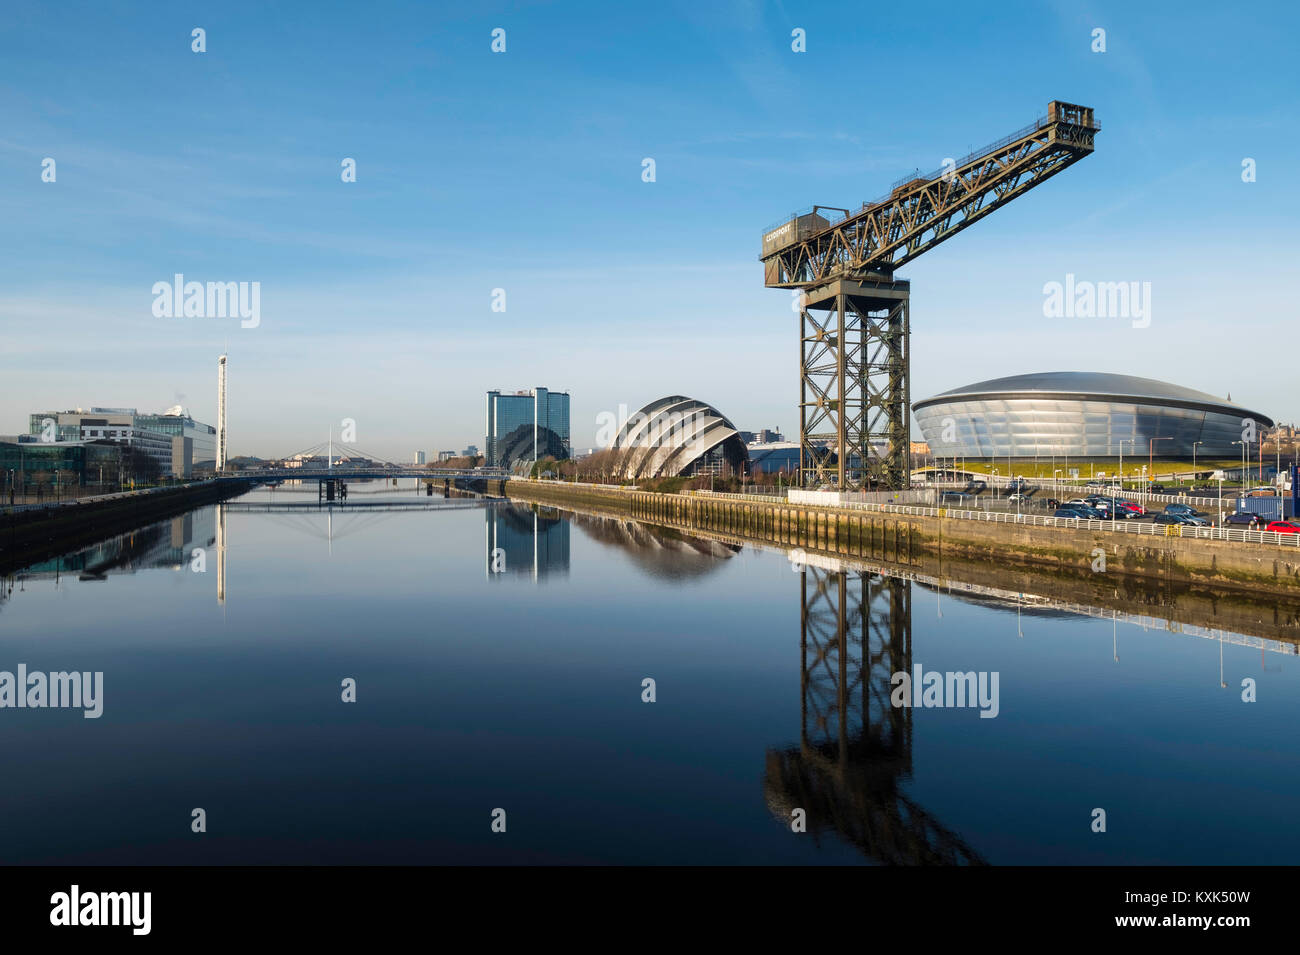 View of Finnieston Crane, SEC Armadillo and SEE Hydro arena beside River Clyde on blue sky winter day, Scotland, United Kingdom Stock Photo